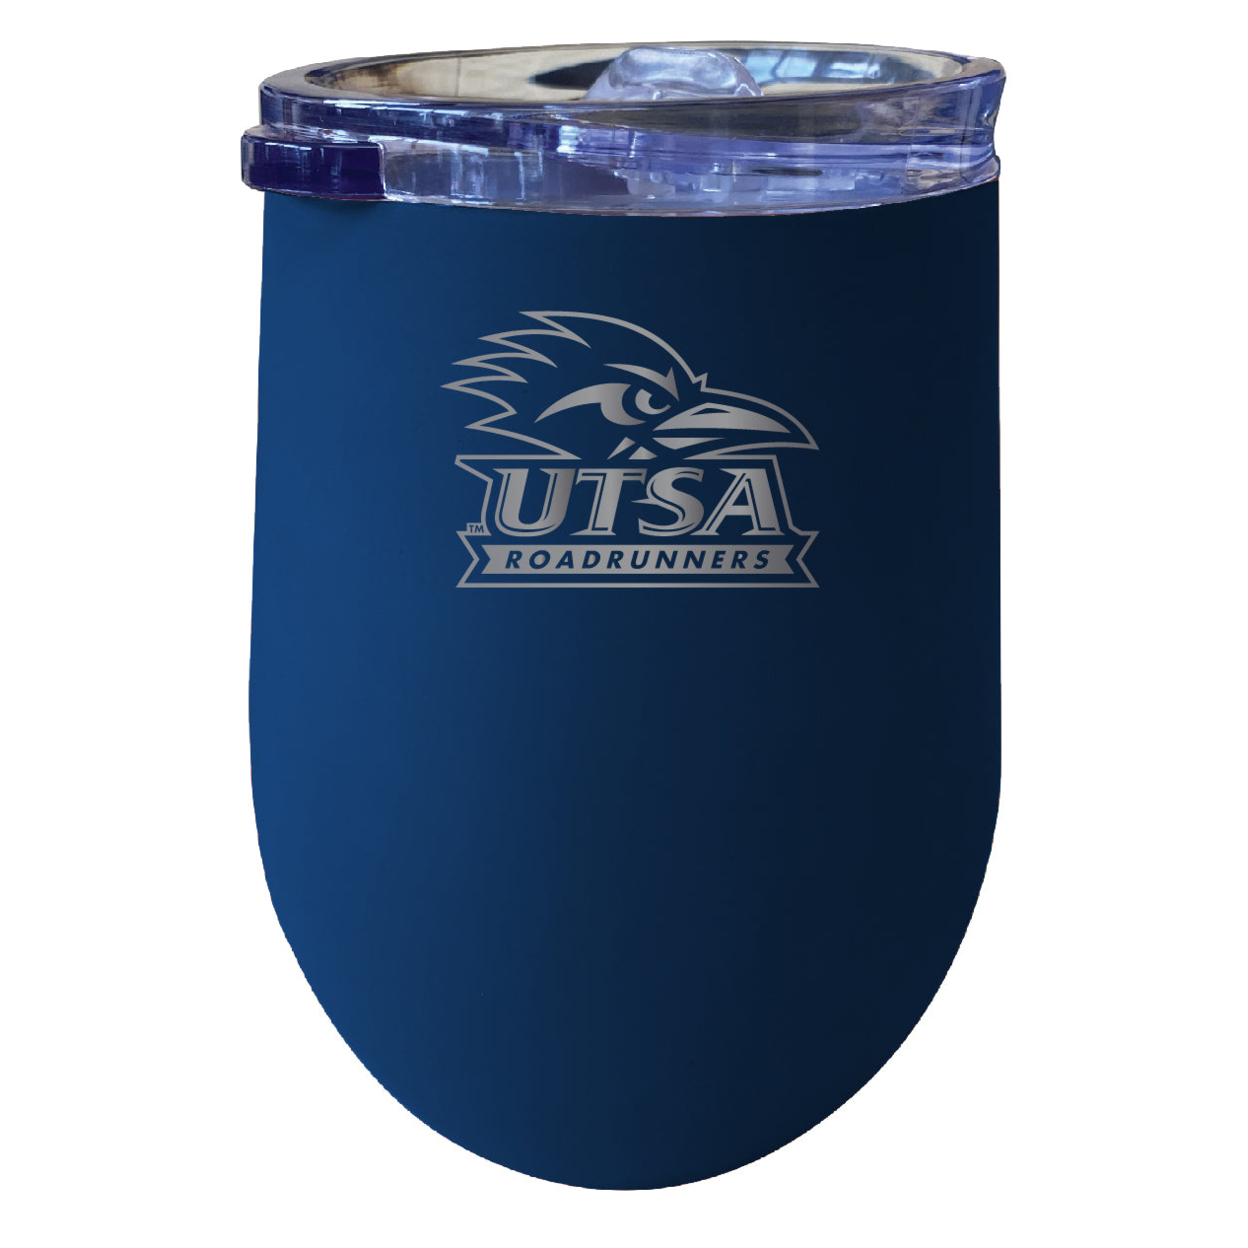 UTSA Road Runners 12 Oz Etched Insulated Wine Stainless Steel Tumbler - Choose Your Color - Navy